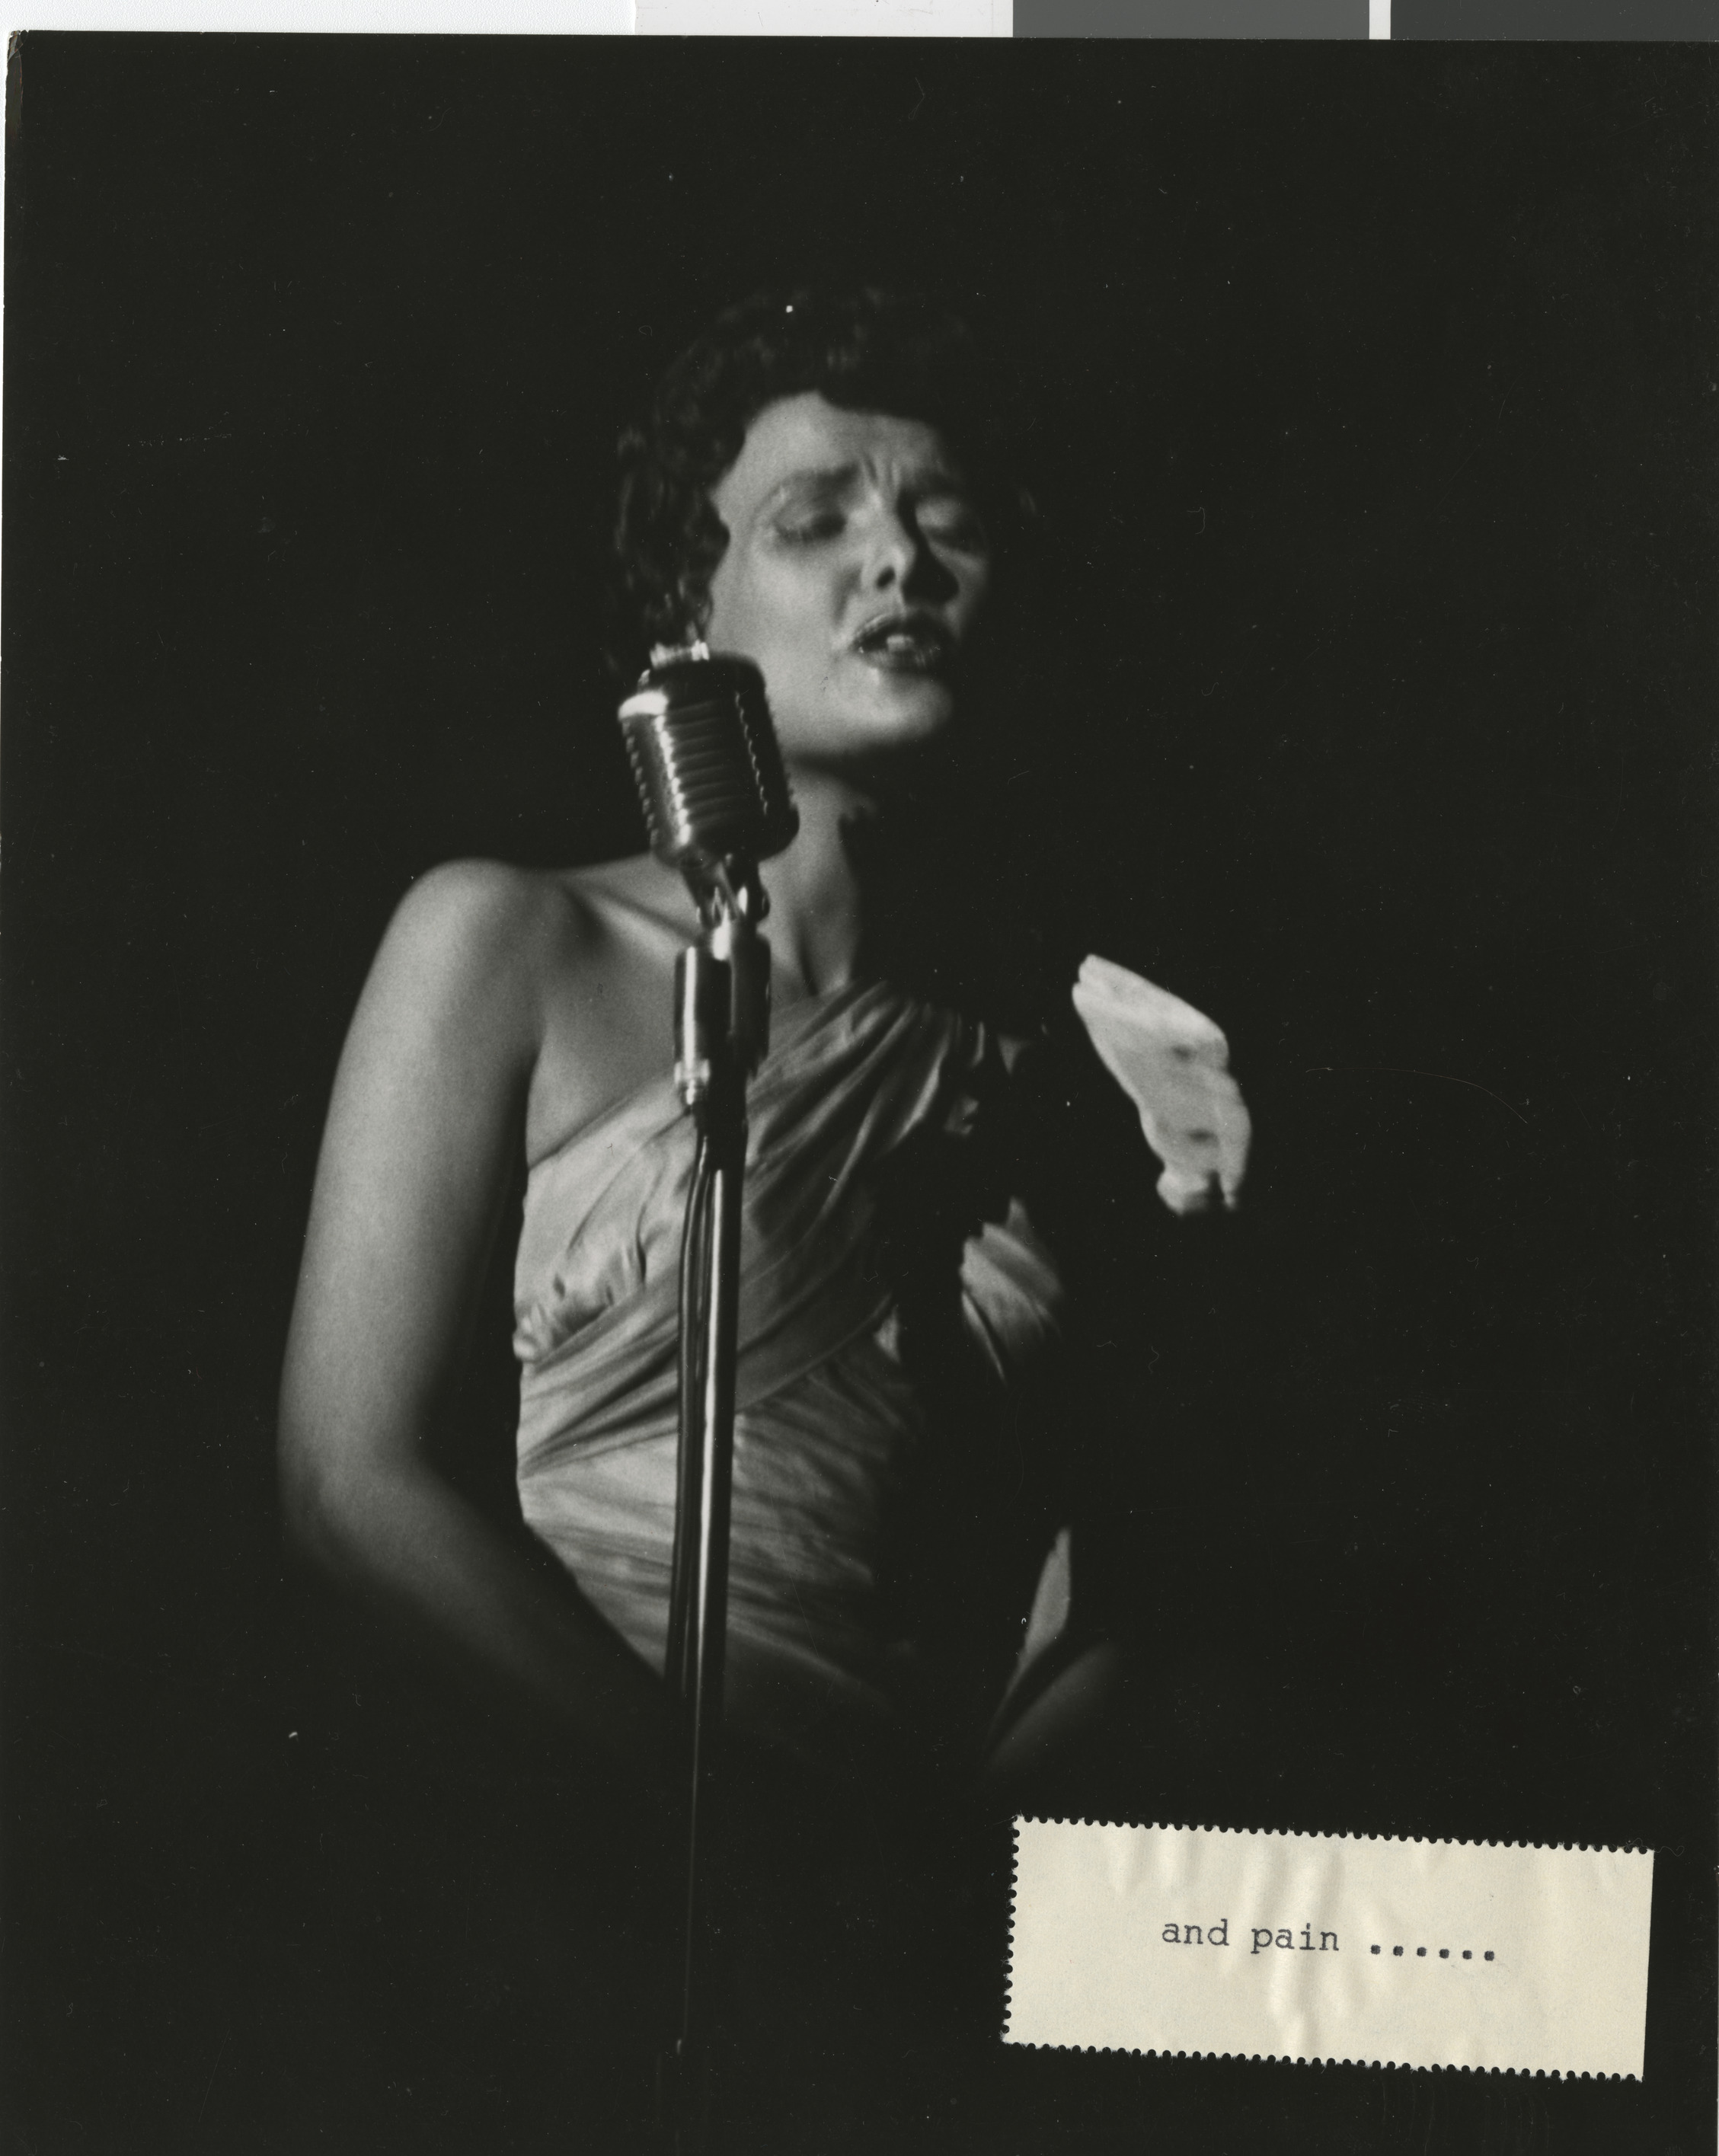 Photograph to accompany story on Lena Horne, pitched to various print magazines